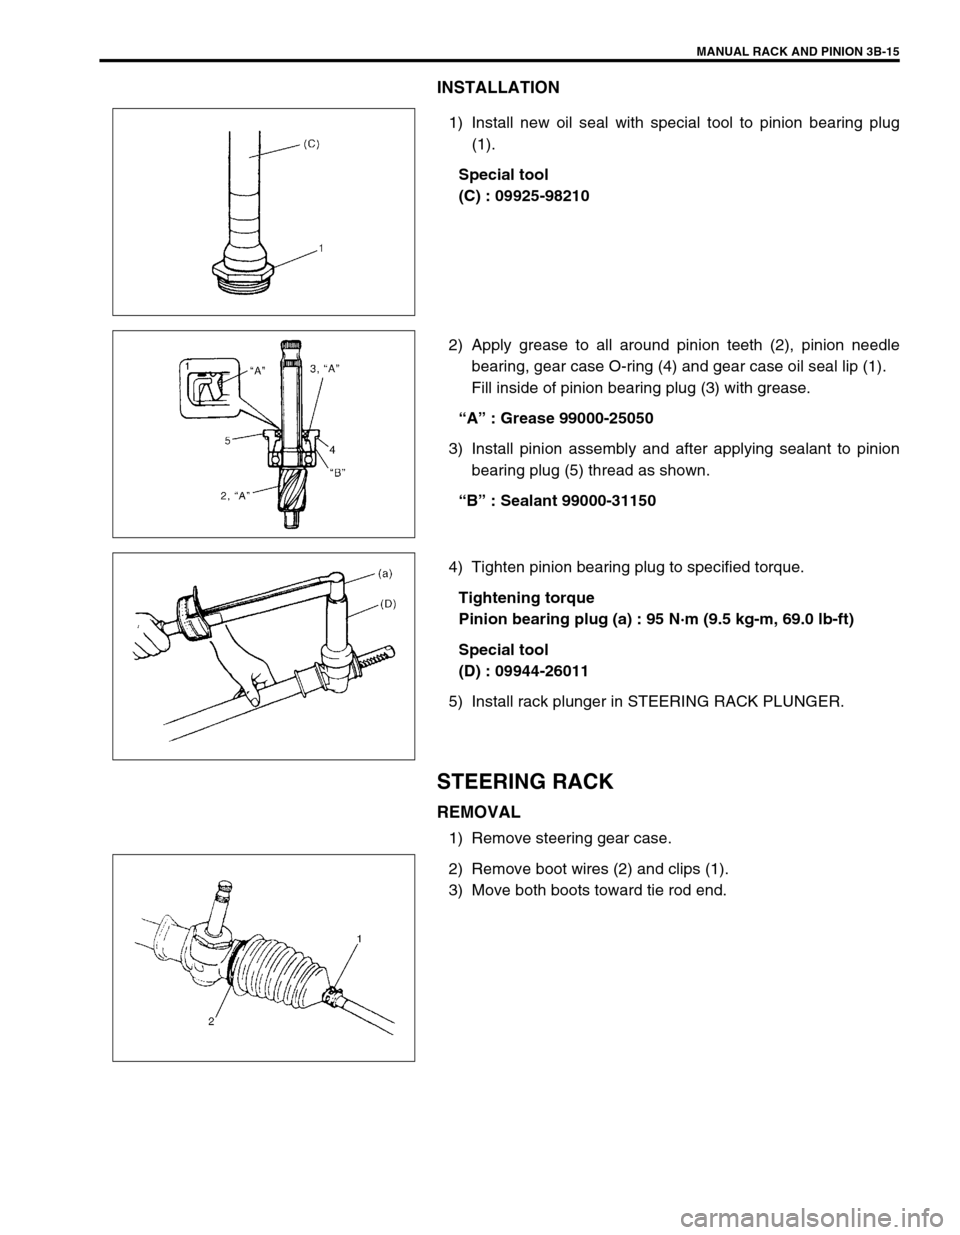 SUZUKI SWIFT 2000 1.G RG413 Service Workshop Manual MANUAL RACK AND PINION 3B-15
INSTALLATION
1) Install new oil seal with special tool to pinion bearing plug
(1).
Special tool
(C) : 09925-98210
2) Apply grease to all around pinion teeth (2), pinion ne